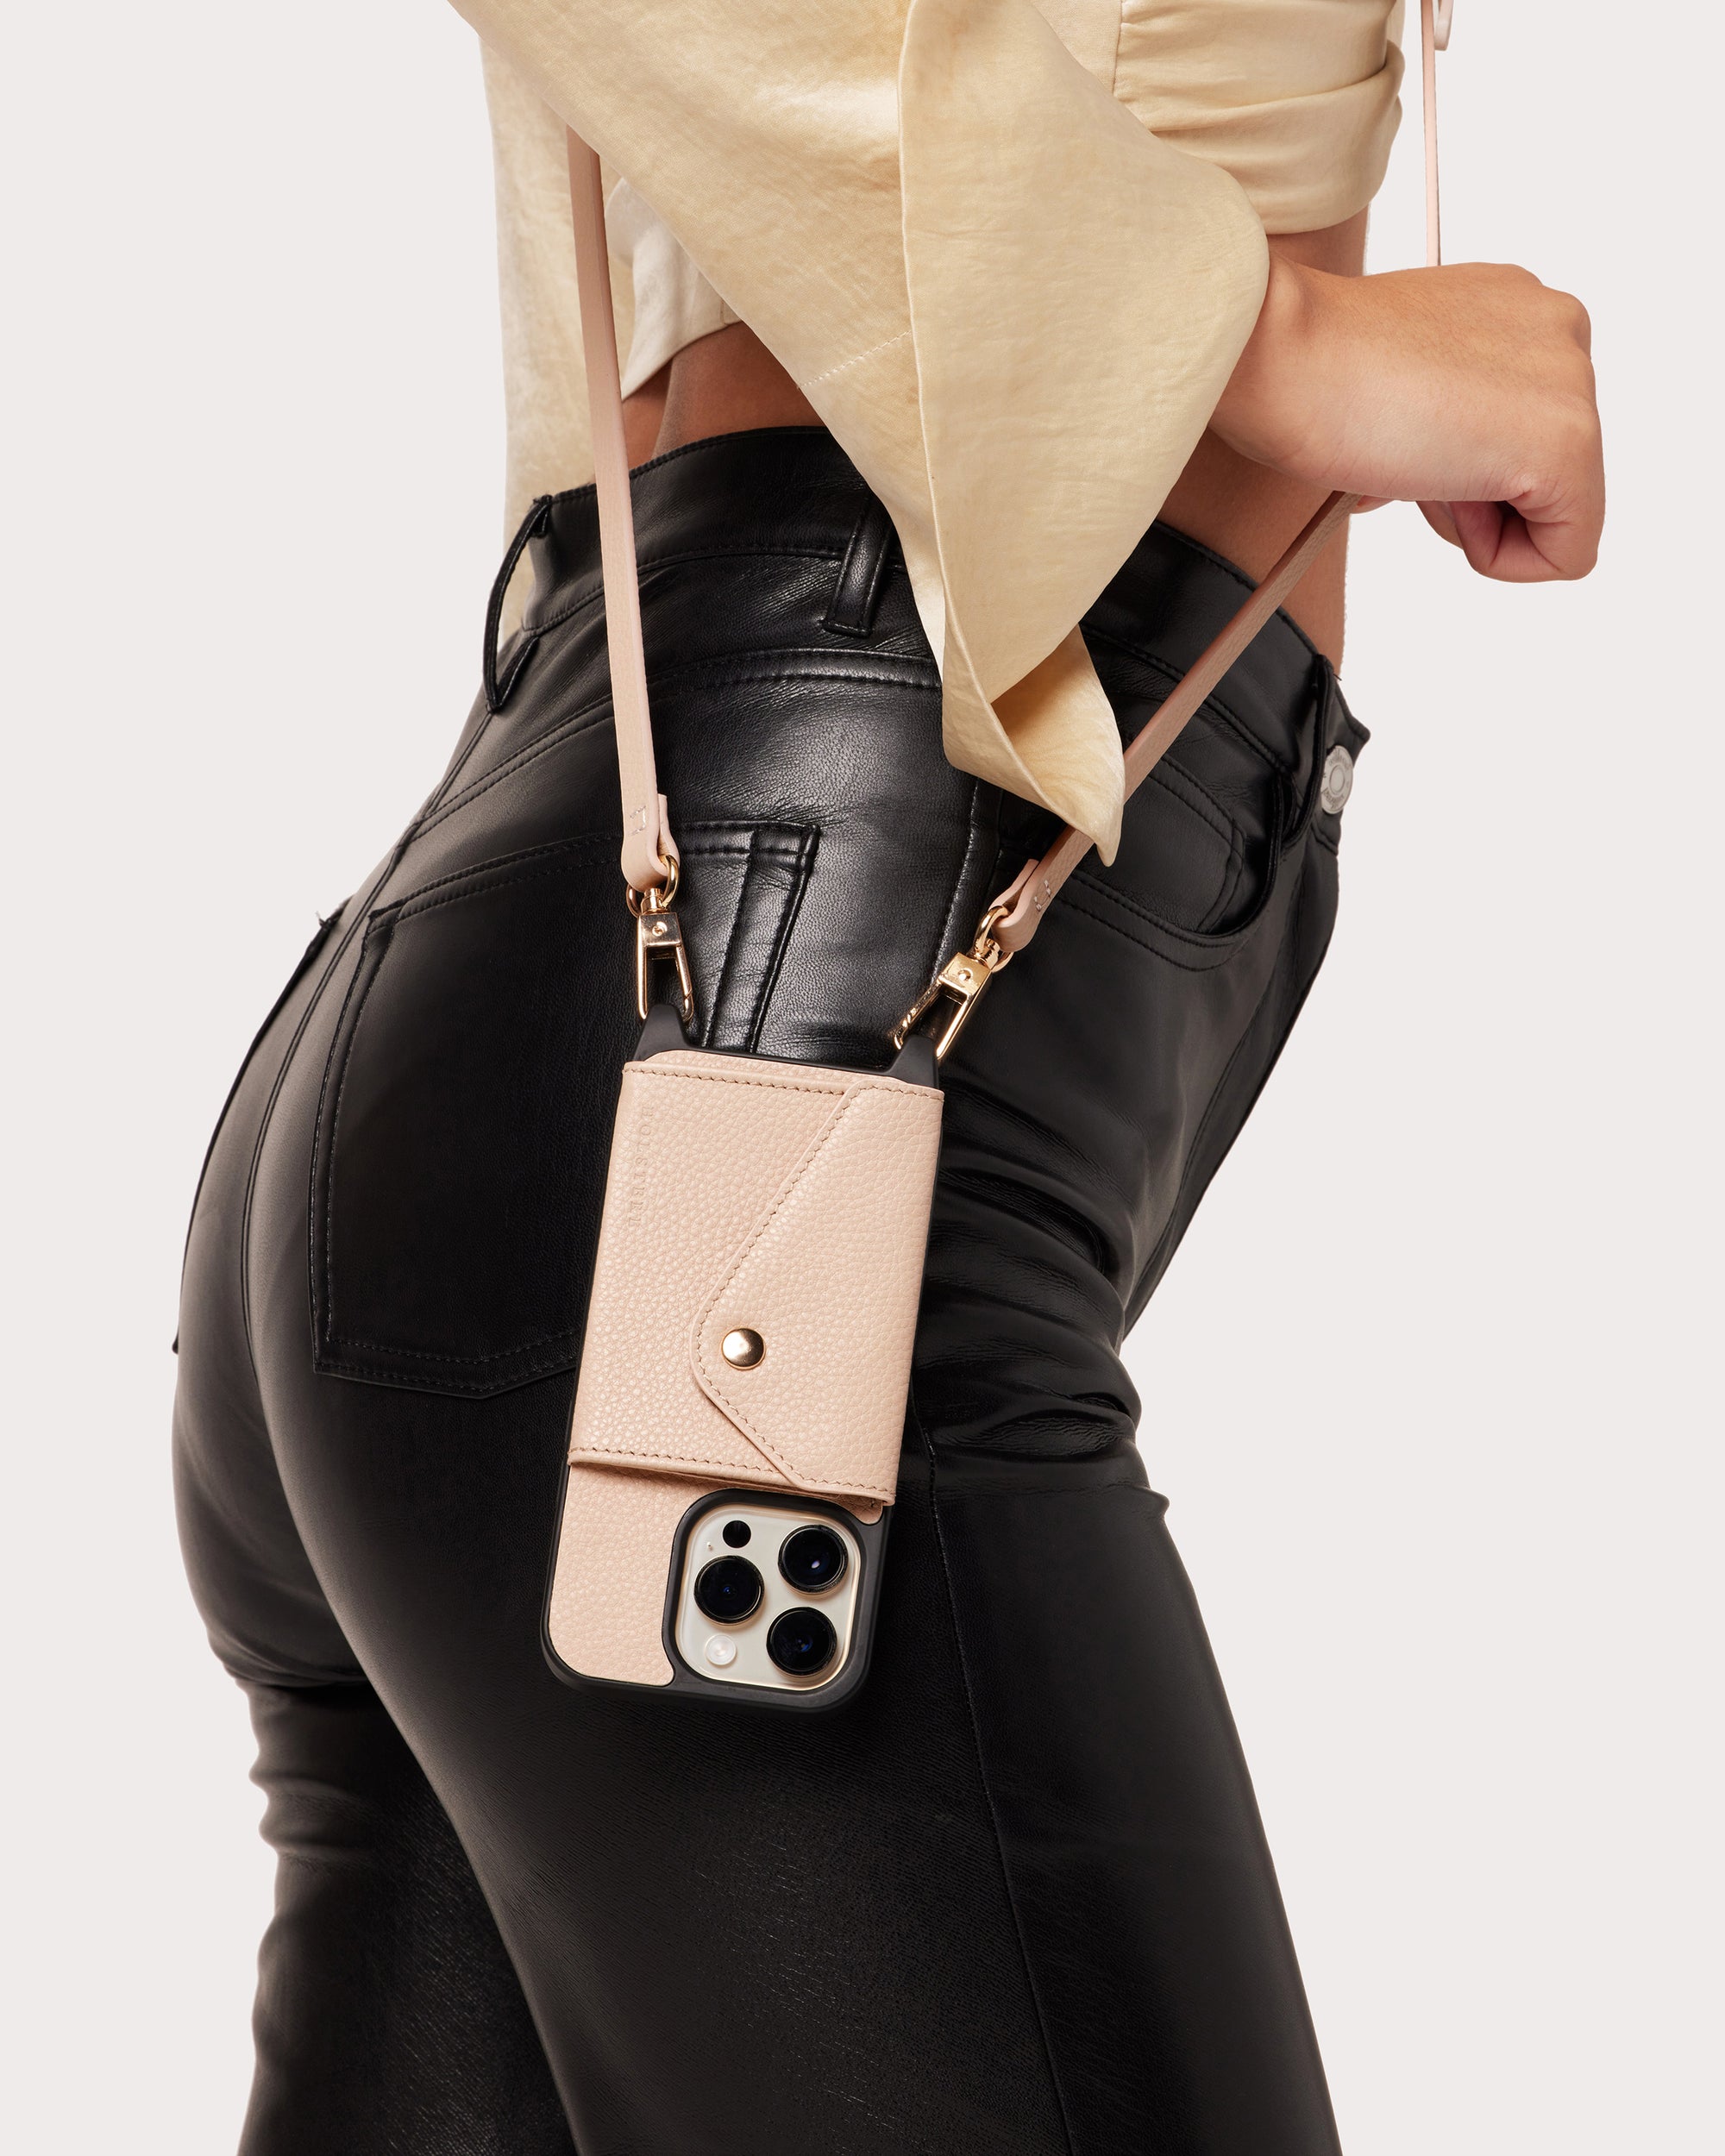 Holstere Genuine Leather iPhone Case Crossbody Phone Purse Cross Body Holster Clip for Easy Carry Hands Free - Cream Blushing Rose Pebbled Real Genuine Leather Snap In Durable Phone Case with Wallet Credit Card ID Sleeve Pocket, Snap Shut Button, and Adjustable Length Shoulder Strap with Gold Hardware and Clasp. iPhone Leash Necklace for iPhone 14, 14 Pro, 14 Pro Max, 14 Plus